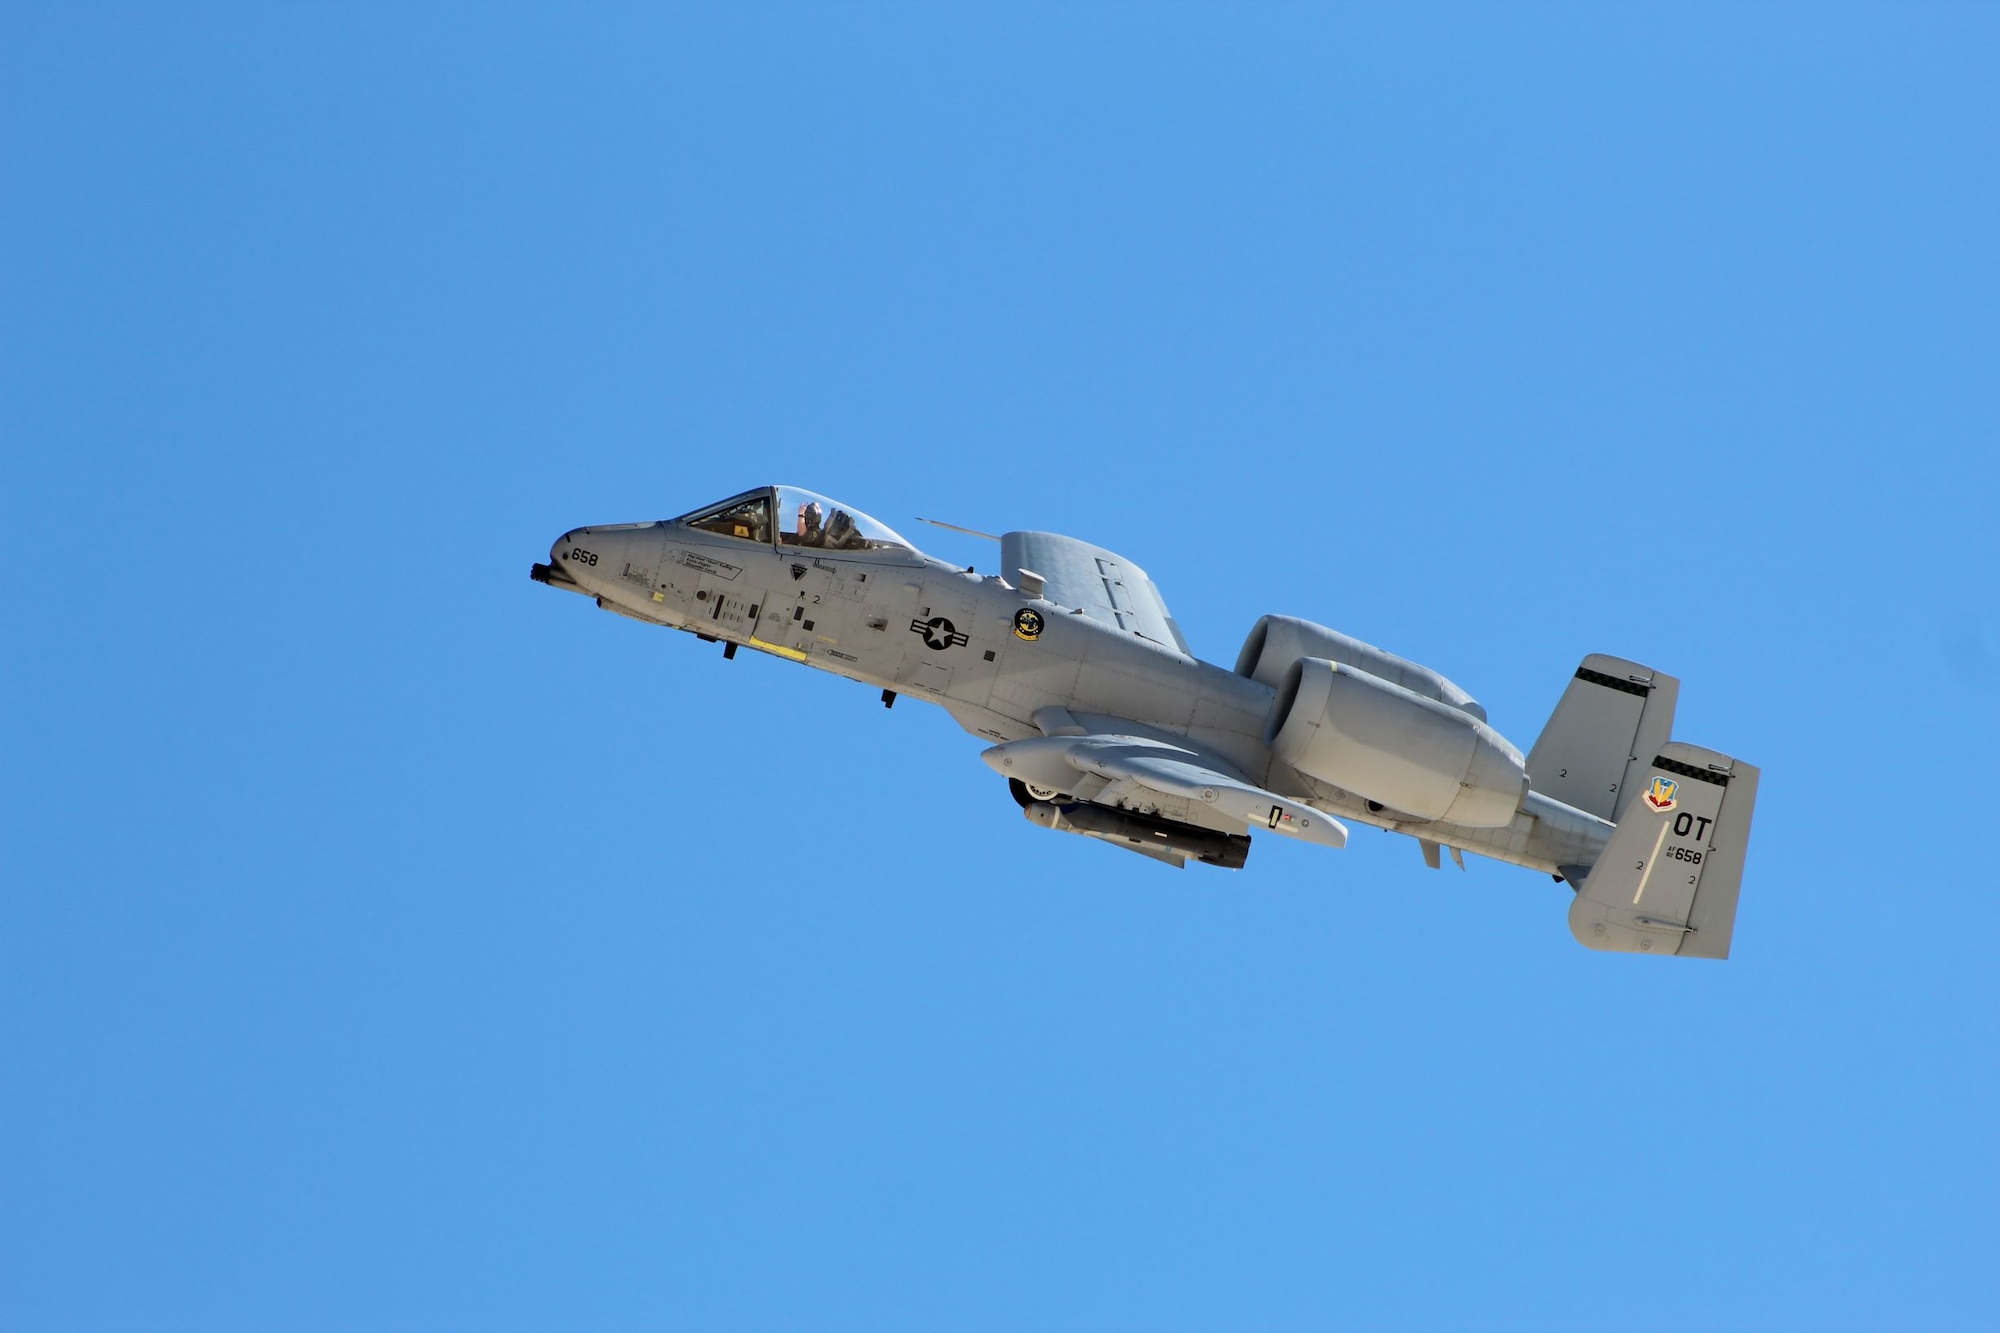 A-10C munitions render Explosive Reactive Armored tanks ...